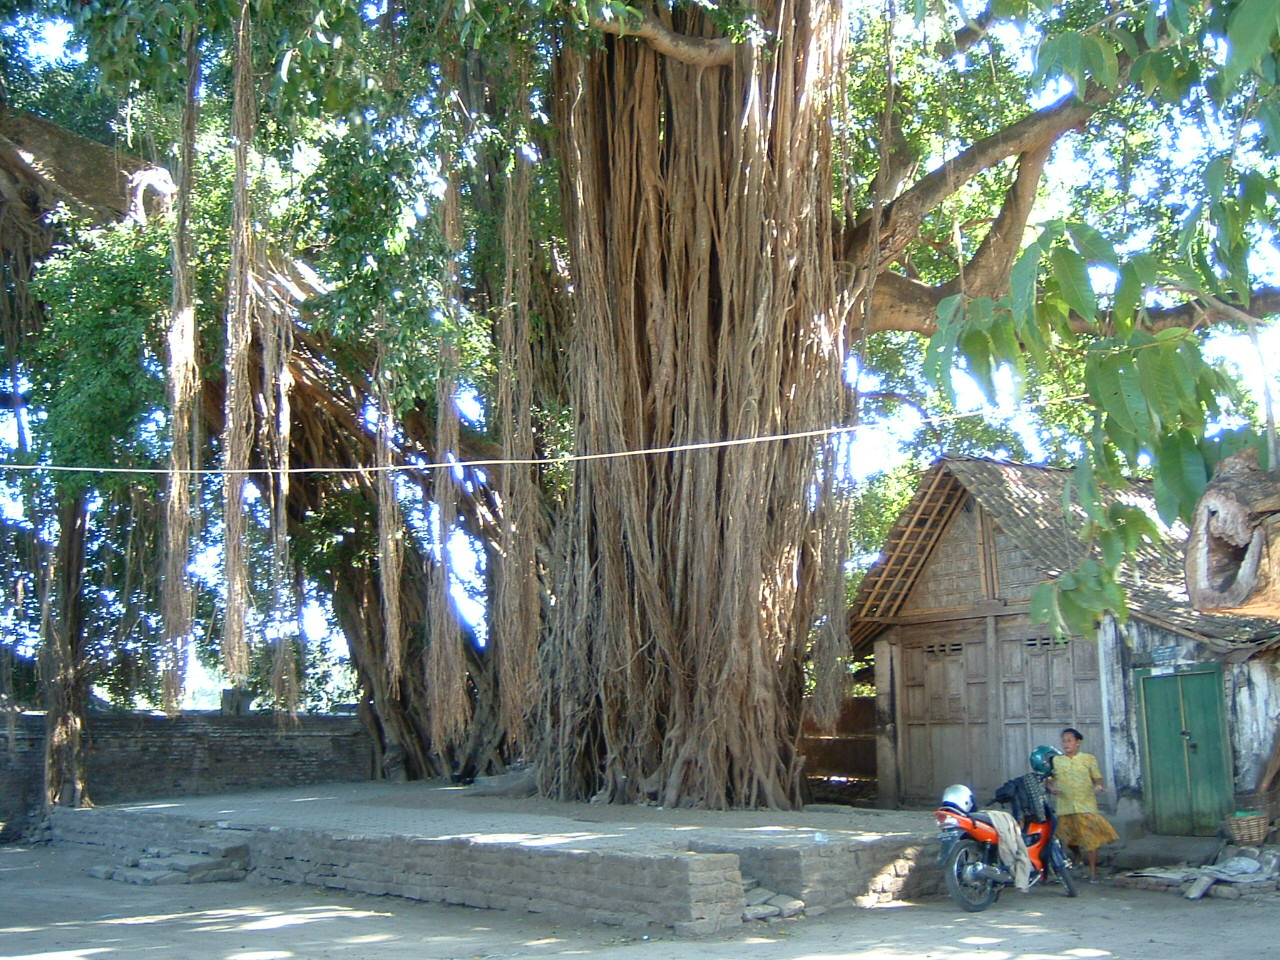 Exterior view of sacred banyon tree outside the mosque